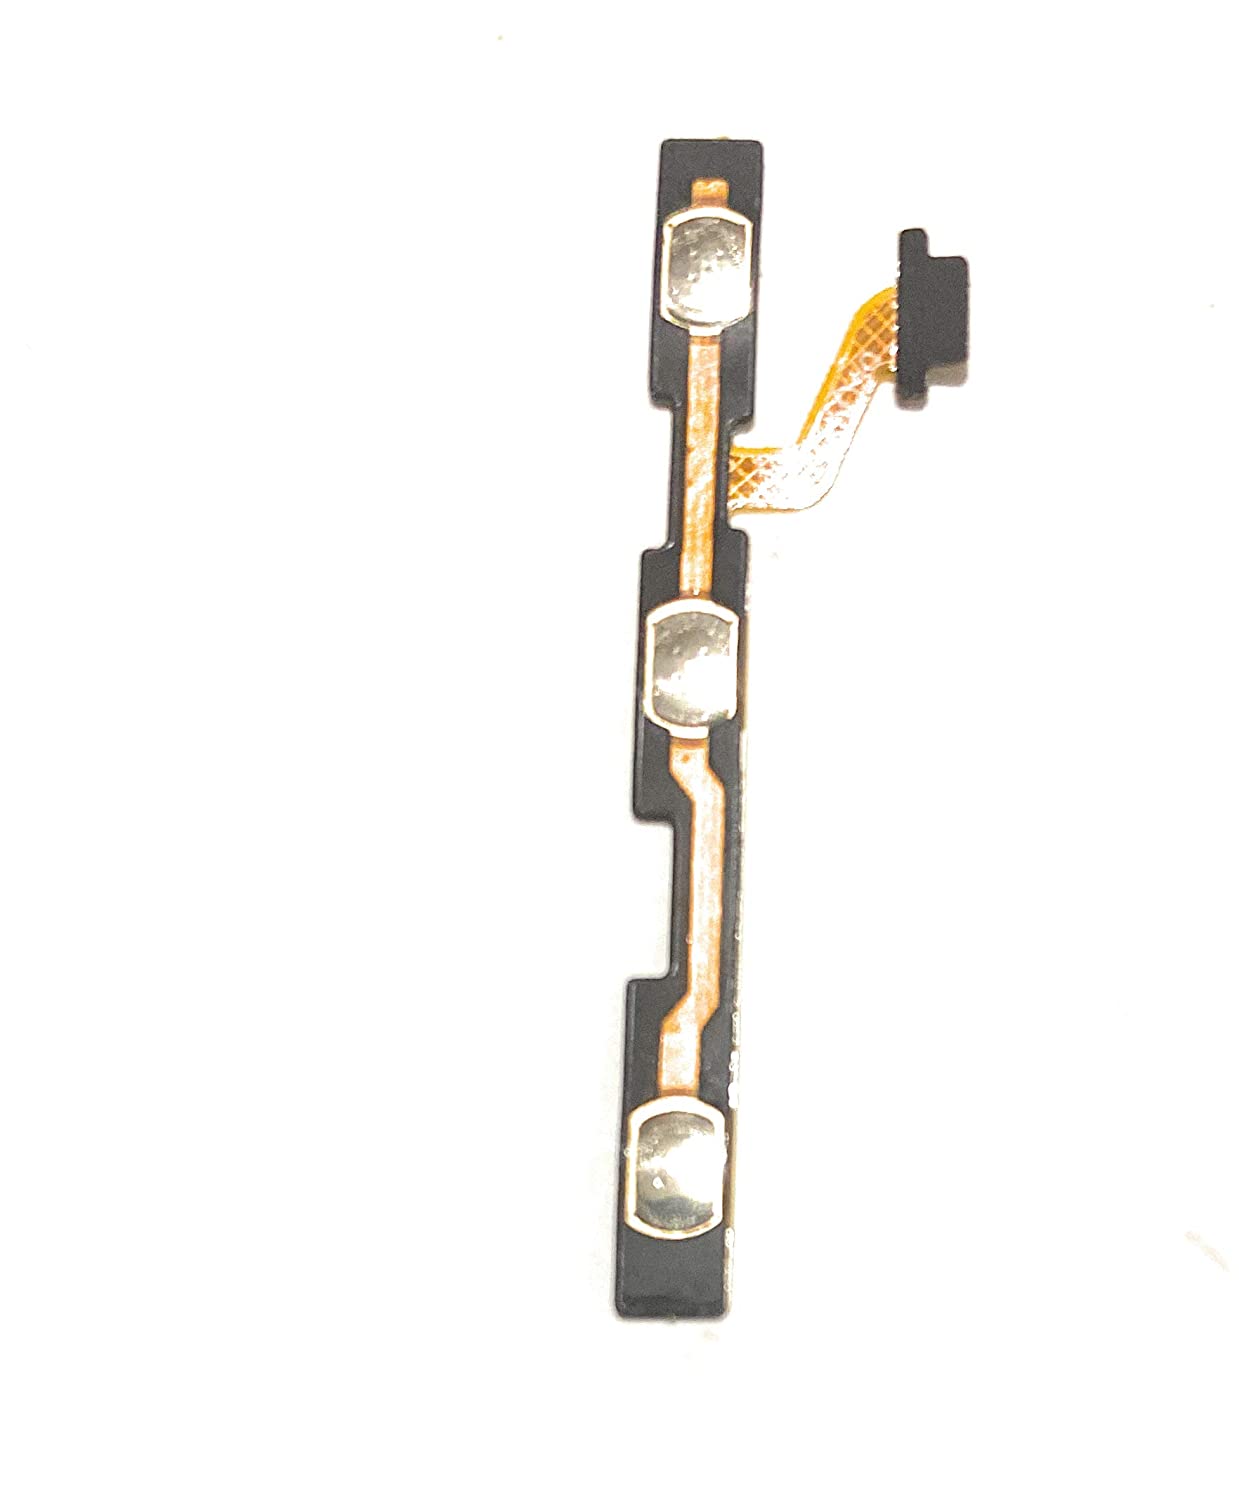 M On Off Volume Key Button up Down Power Switch Flex Strip for